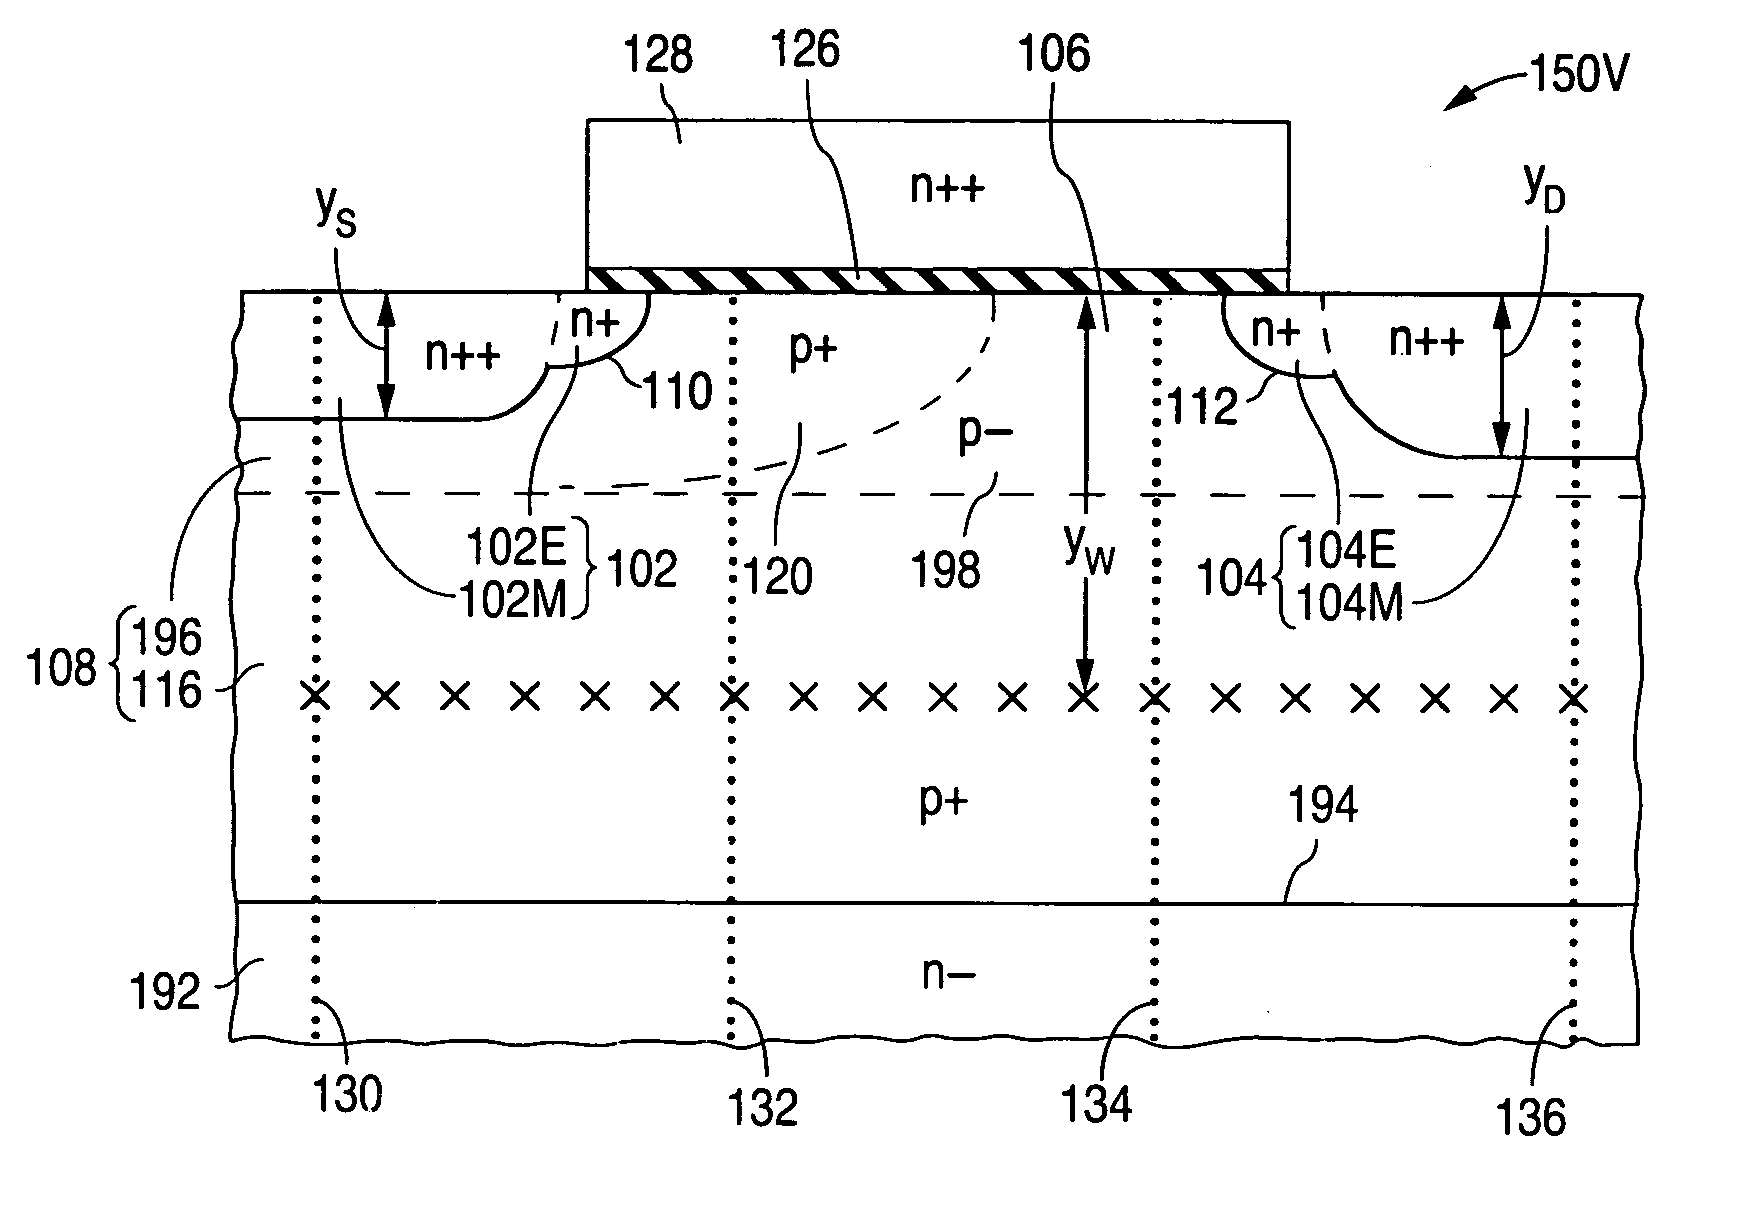 Semiconductor architecture having field-effect transistors especially suitable for analog applications